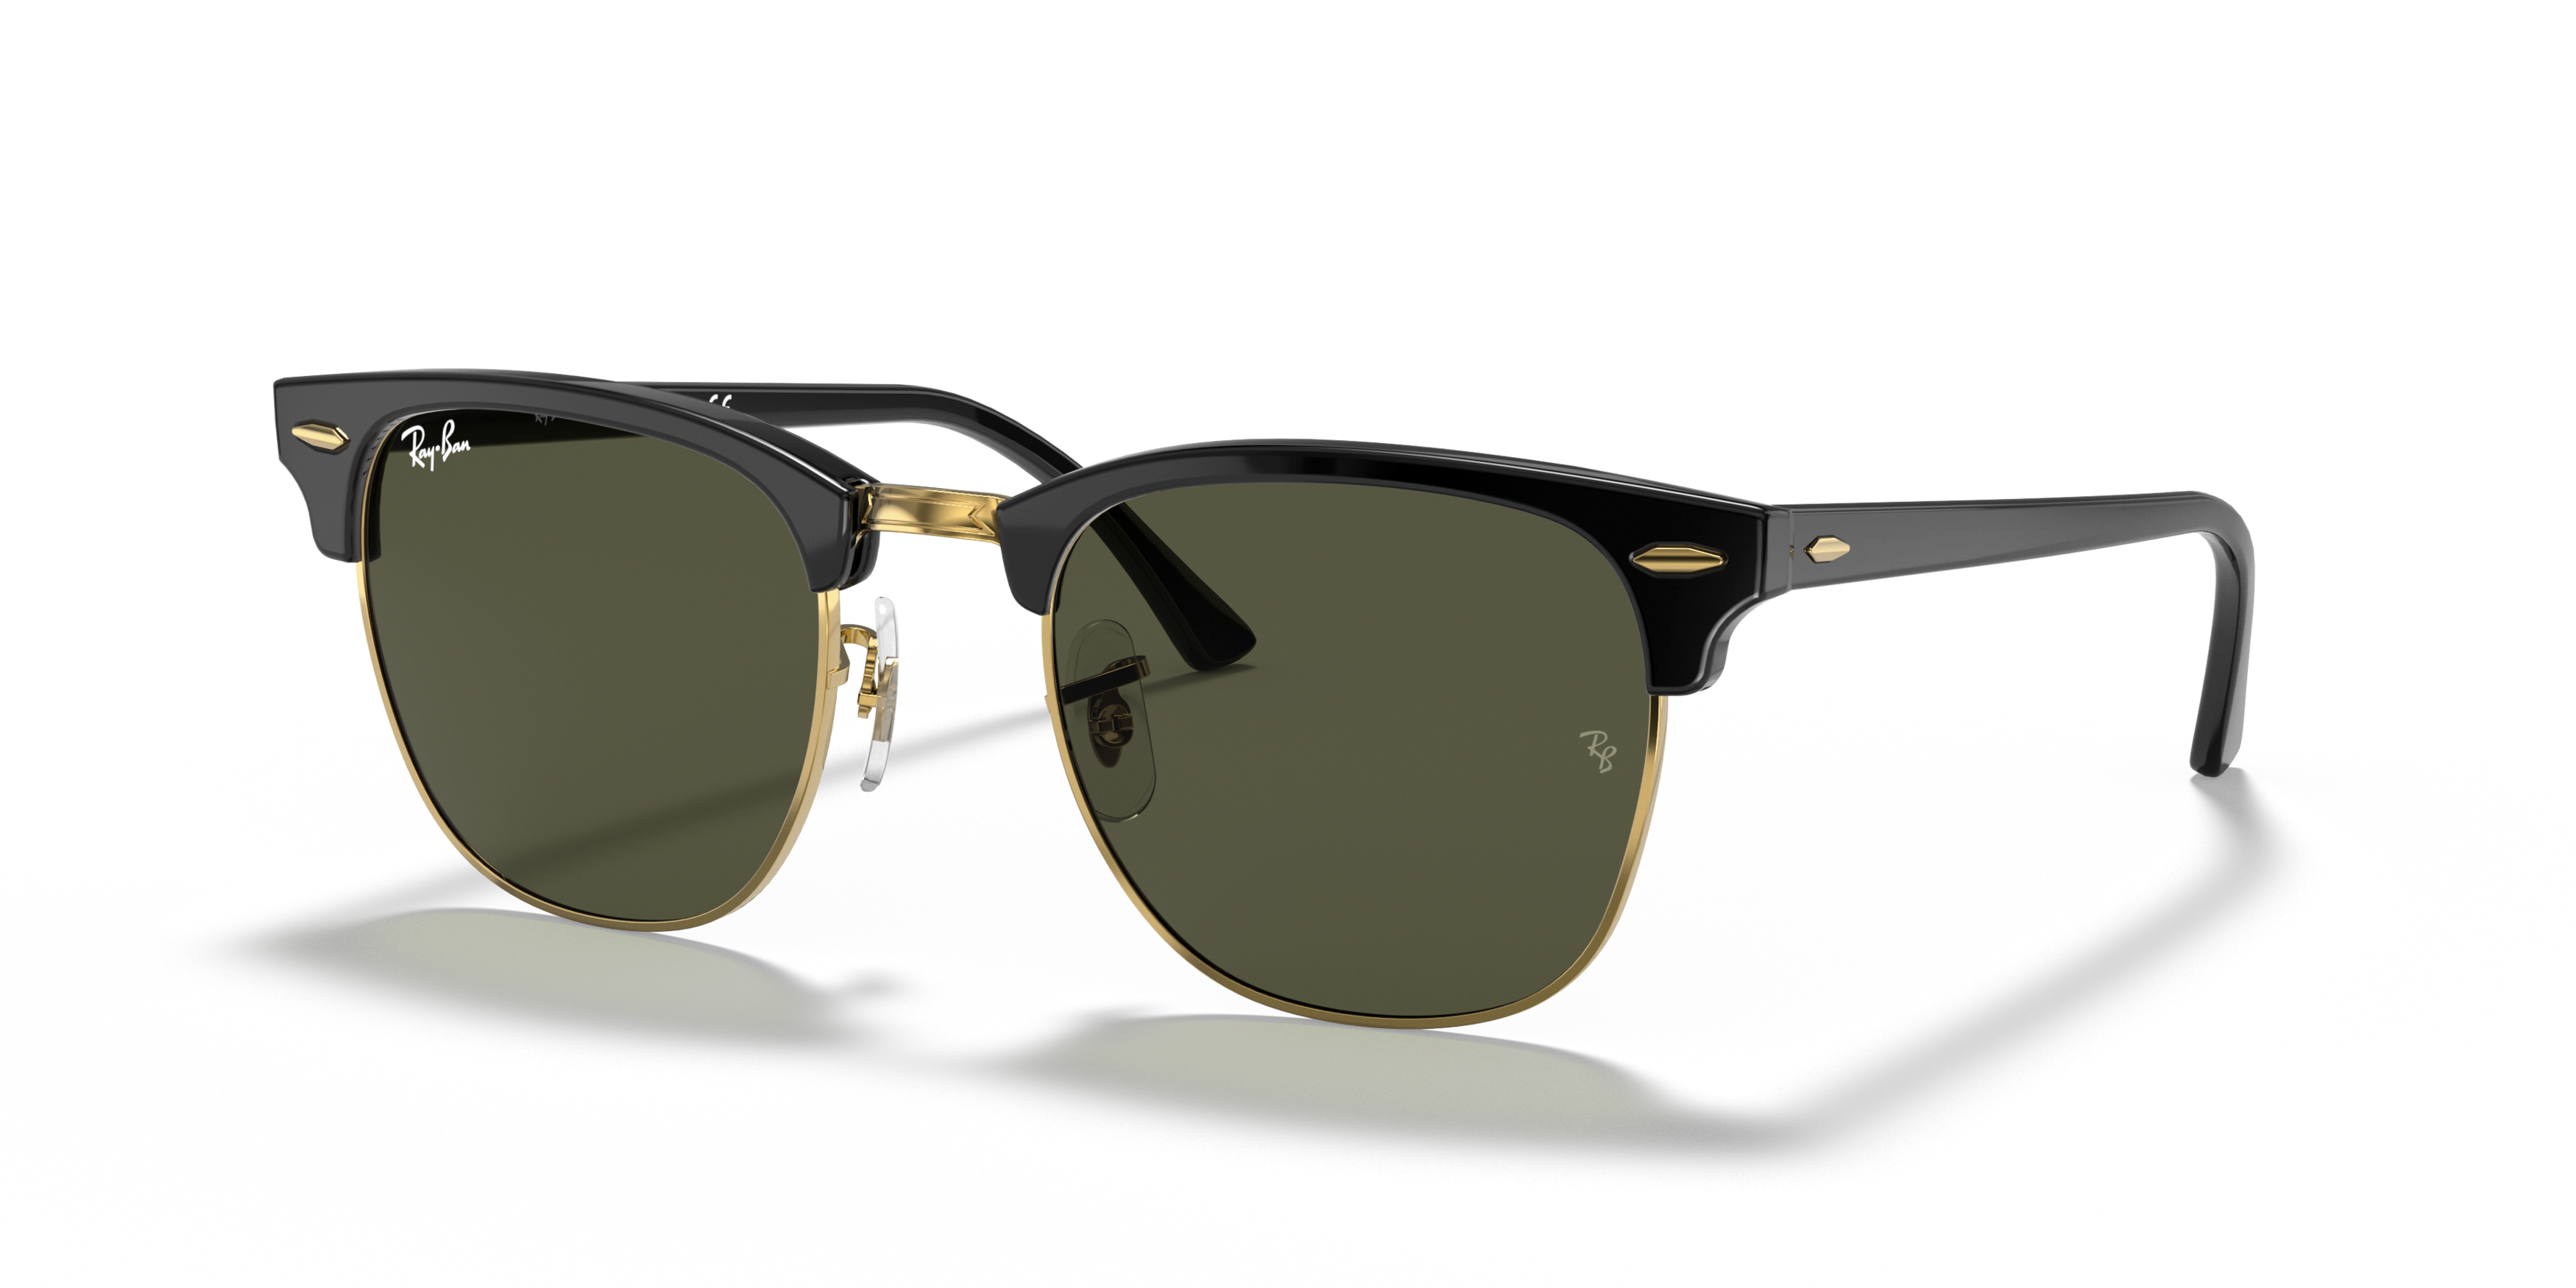 Angle_Left01 Ray Ban Clubmaster 0RB3016 W0366 Verde  / Havana 